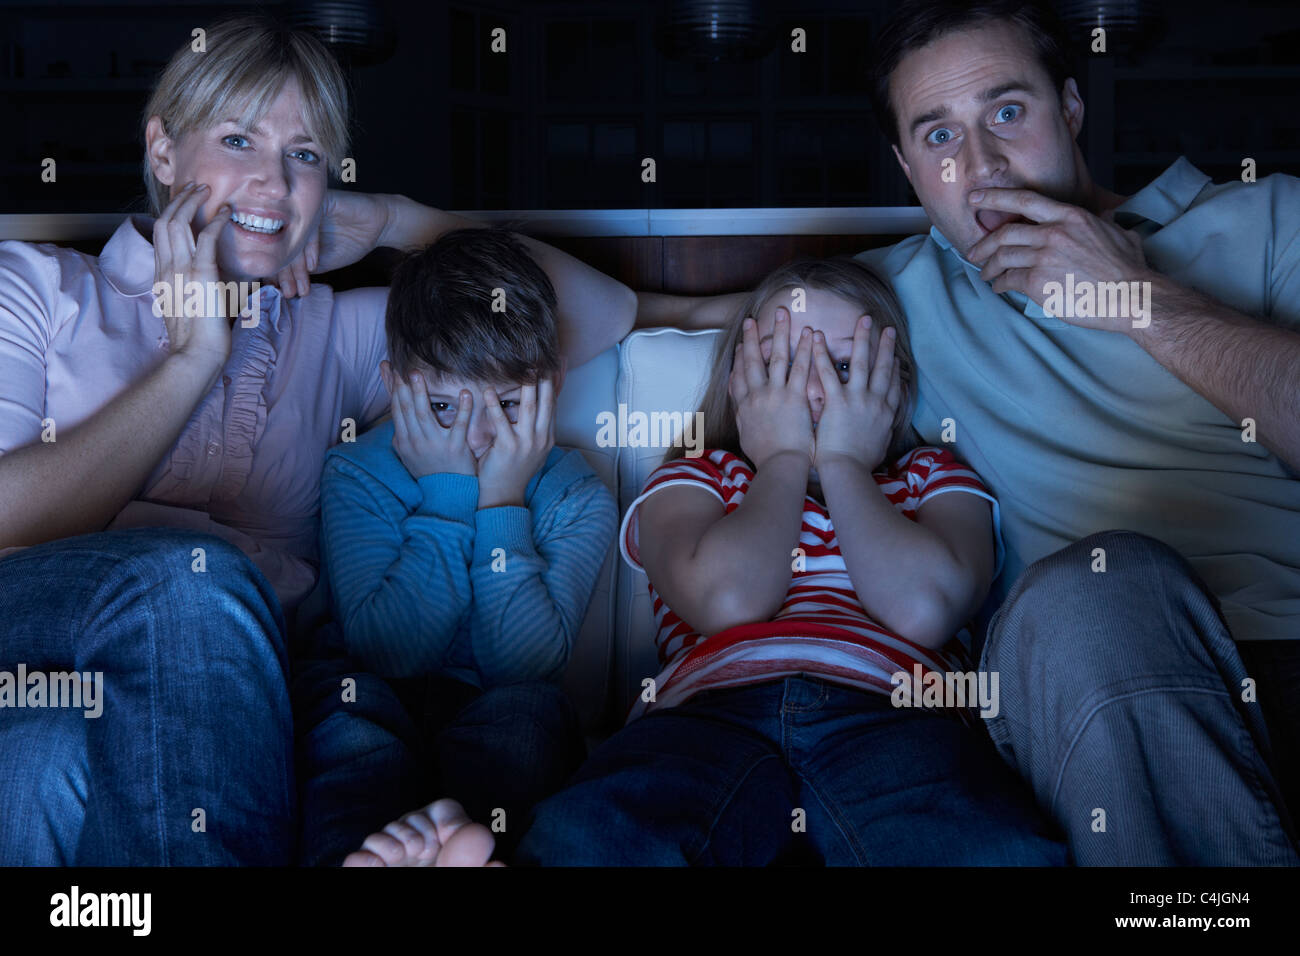 Family Watching Scary Programme On TV Sitting On Sofa Together Stock Photo